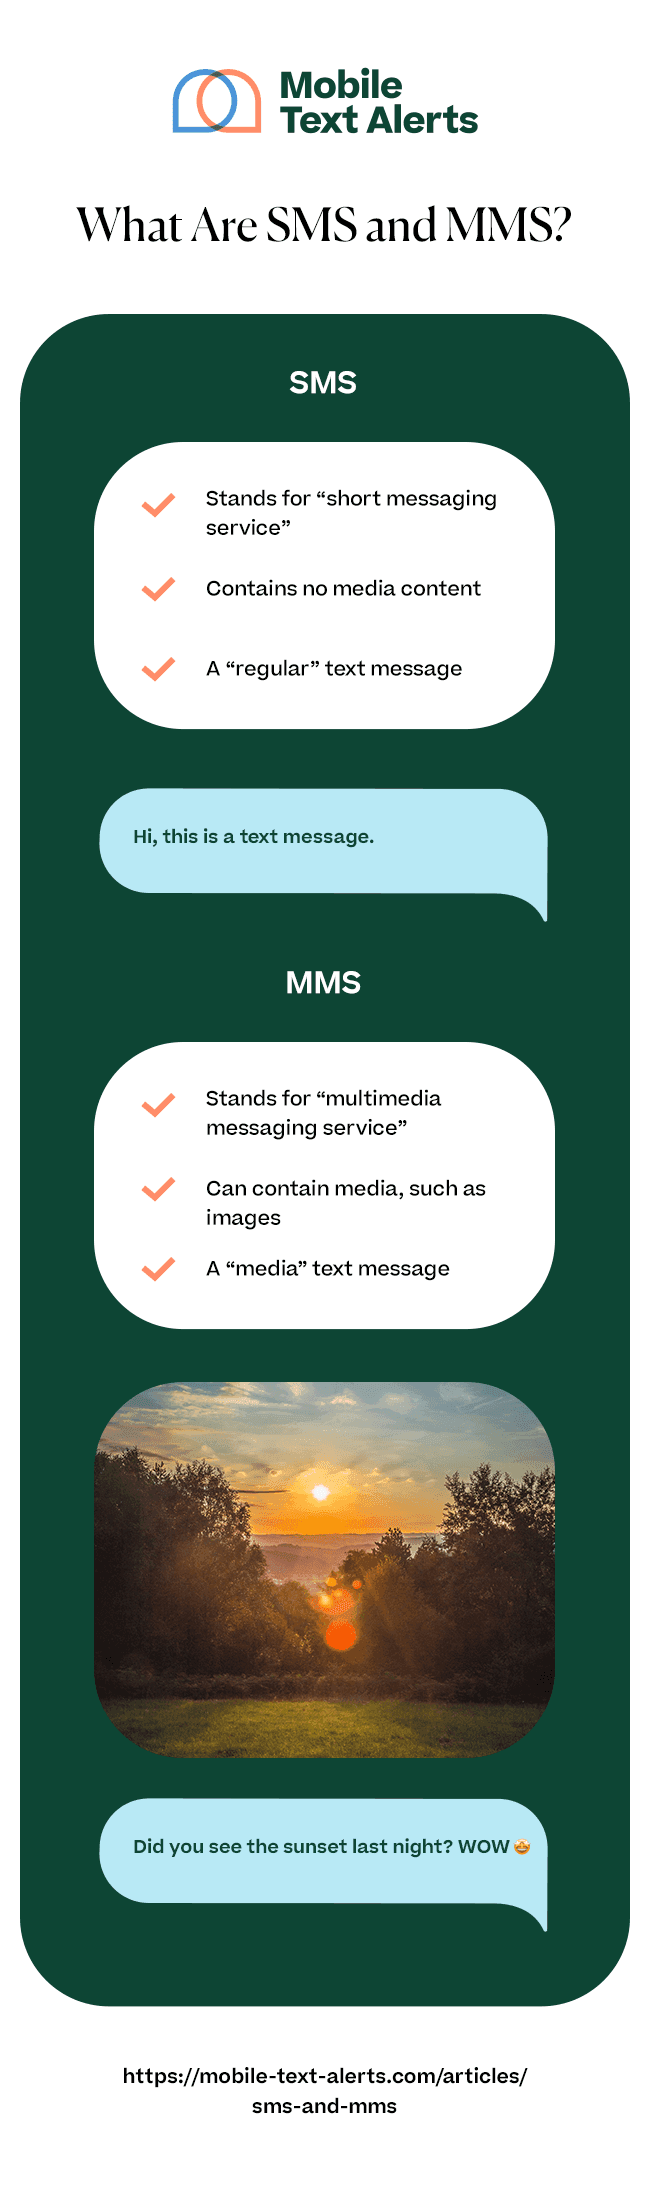 What are SMS and MMS